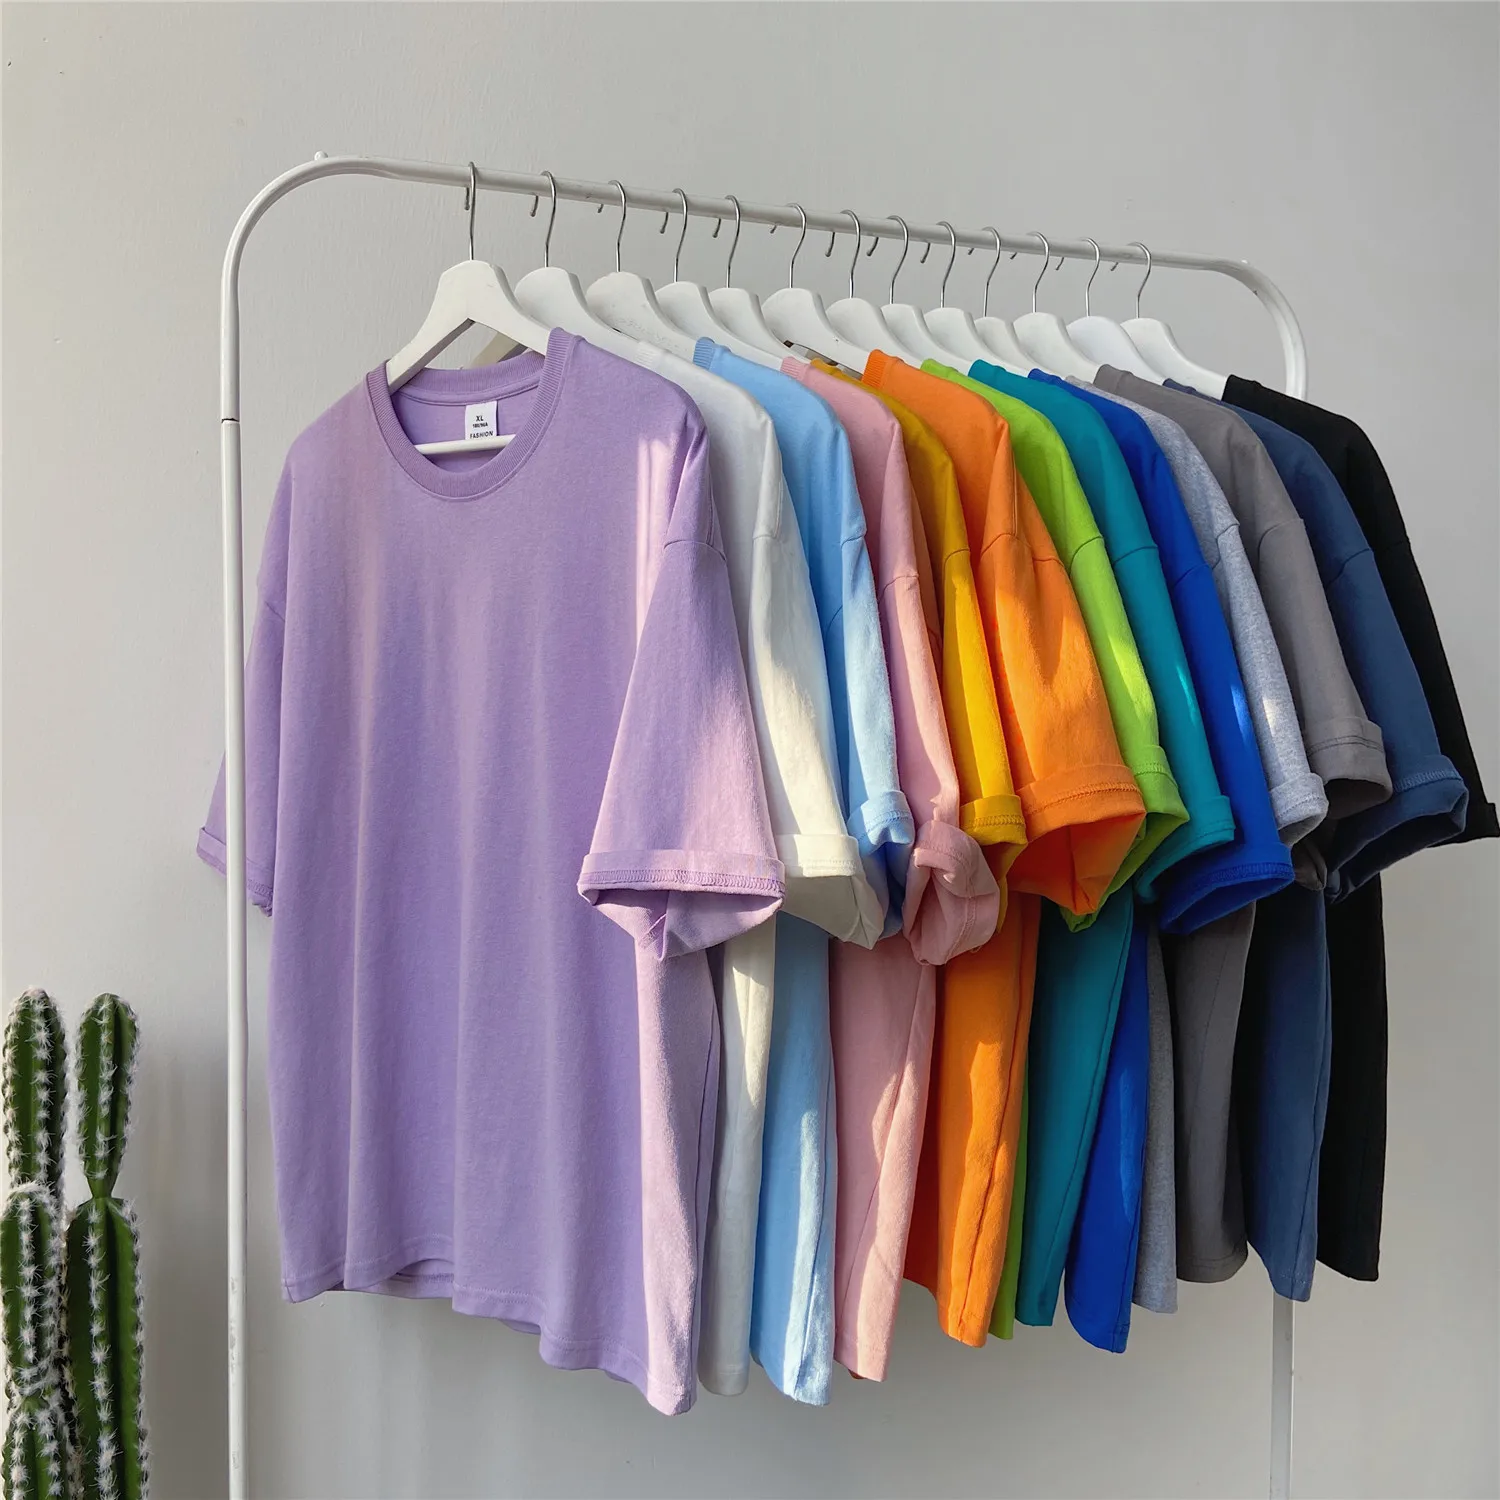 OEIN Solid Color T shirts For Men Korean Tops Man Casual Tshirts 2022 Summer Basic 100% Cotton Tops Tees Couple Women T-shirts